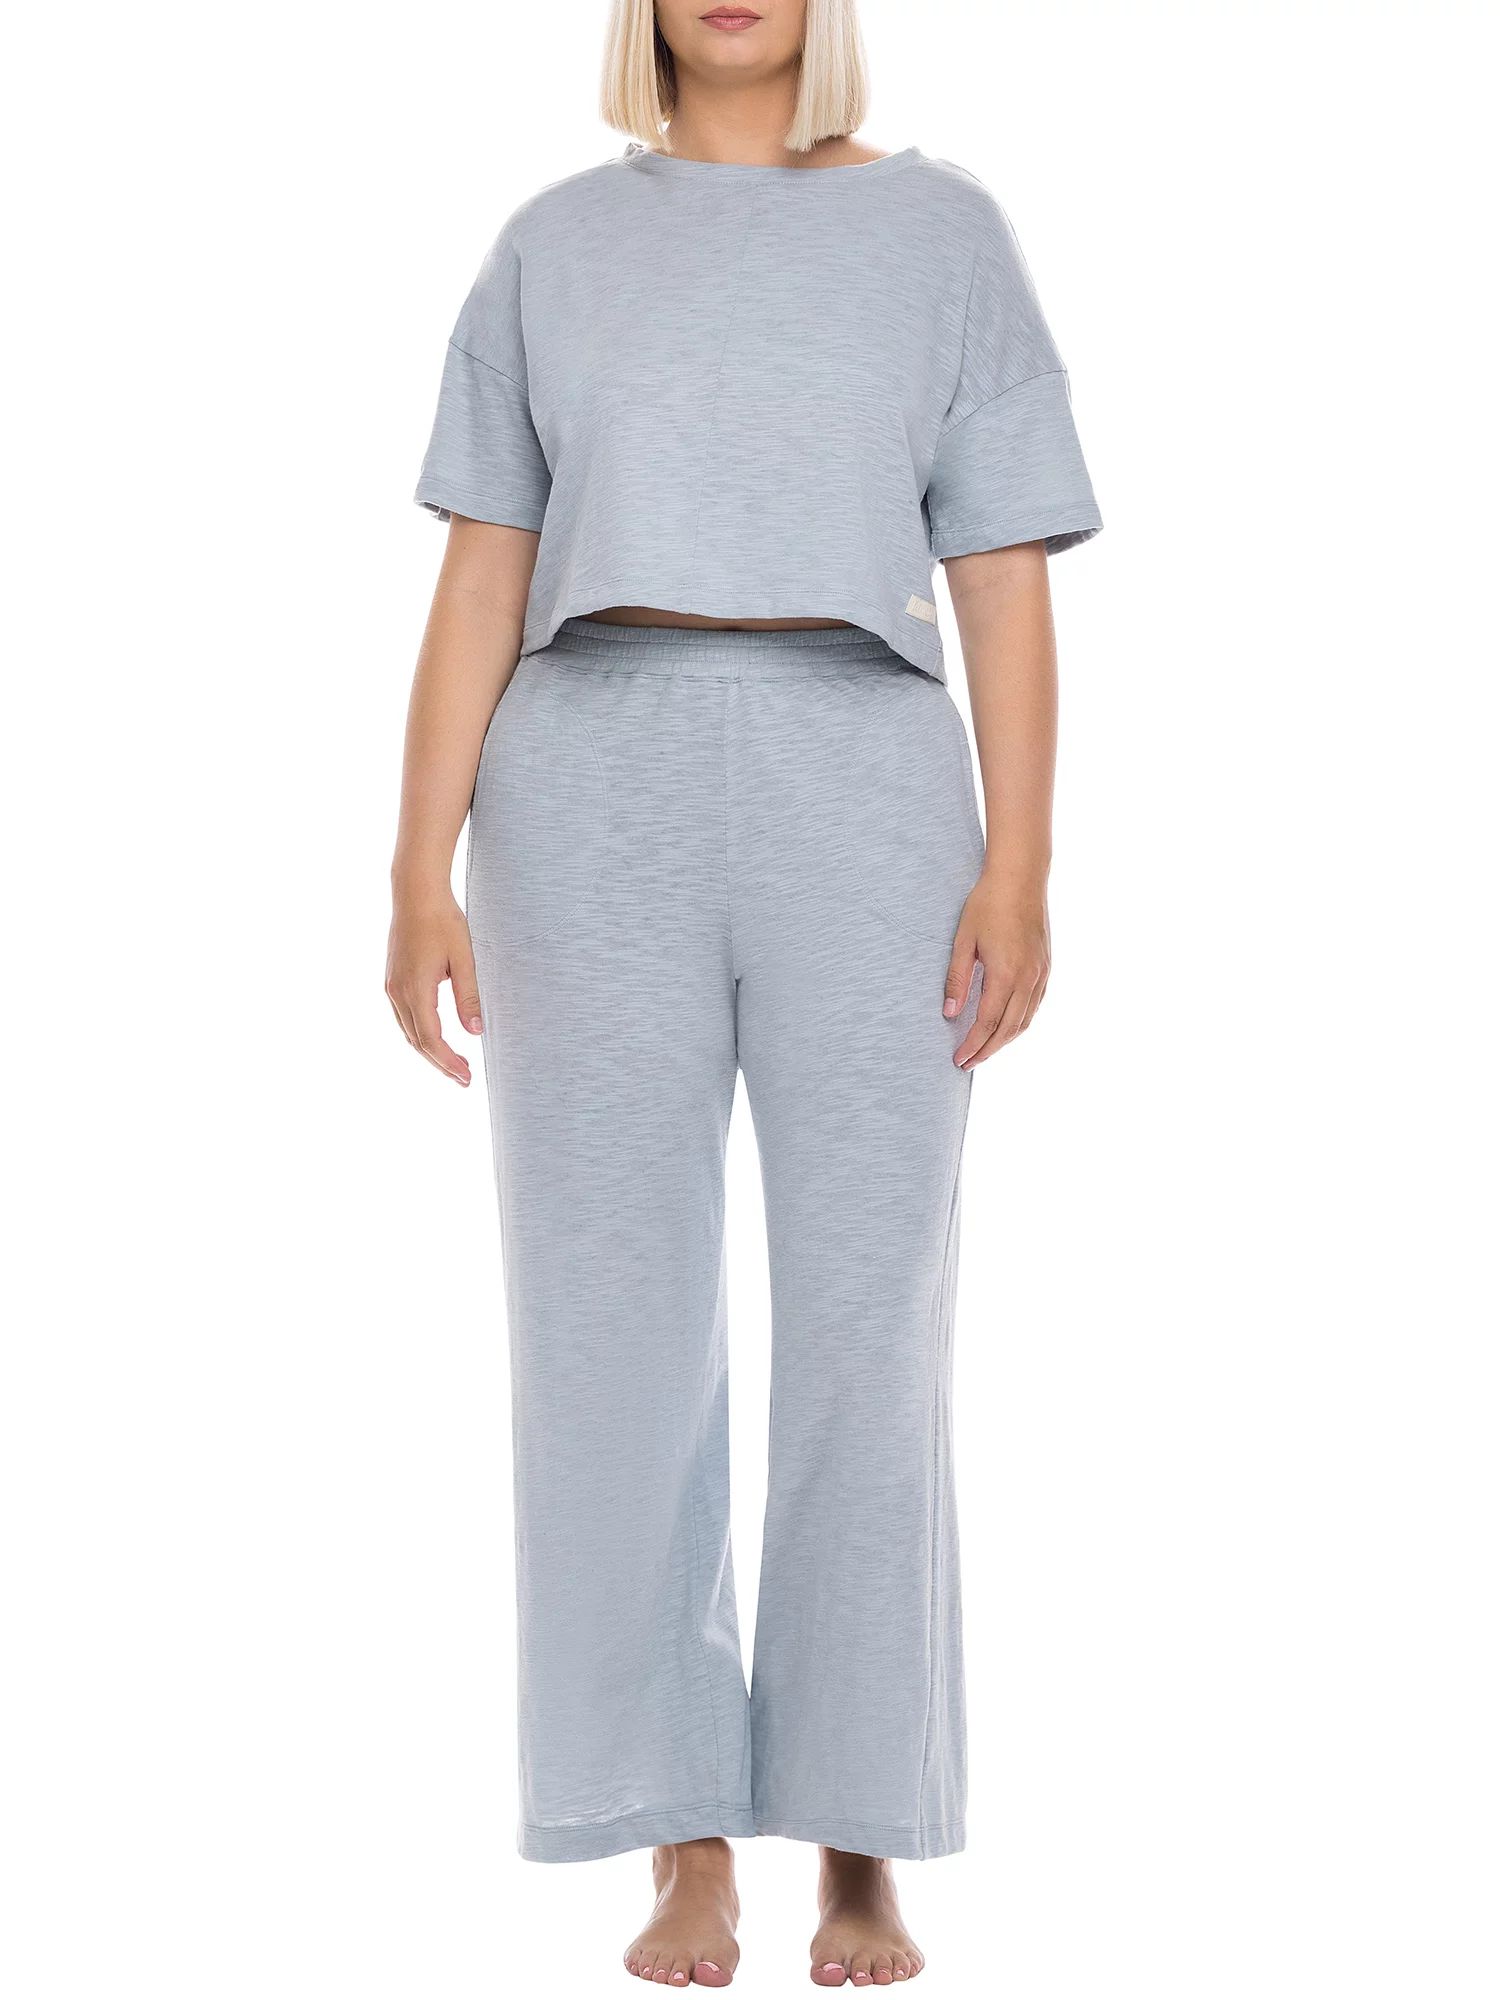 kindly Yours Colorblock Day & Night Short Sleeve Tee and Pant Set (Women’s) | Walmart (US)